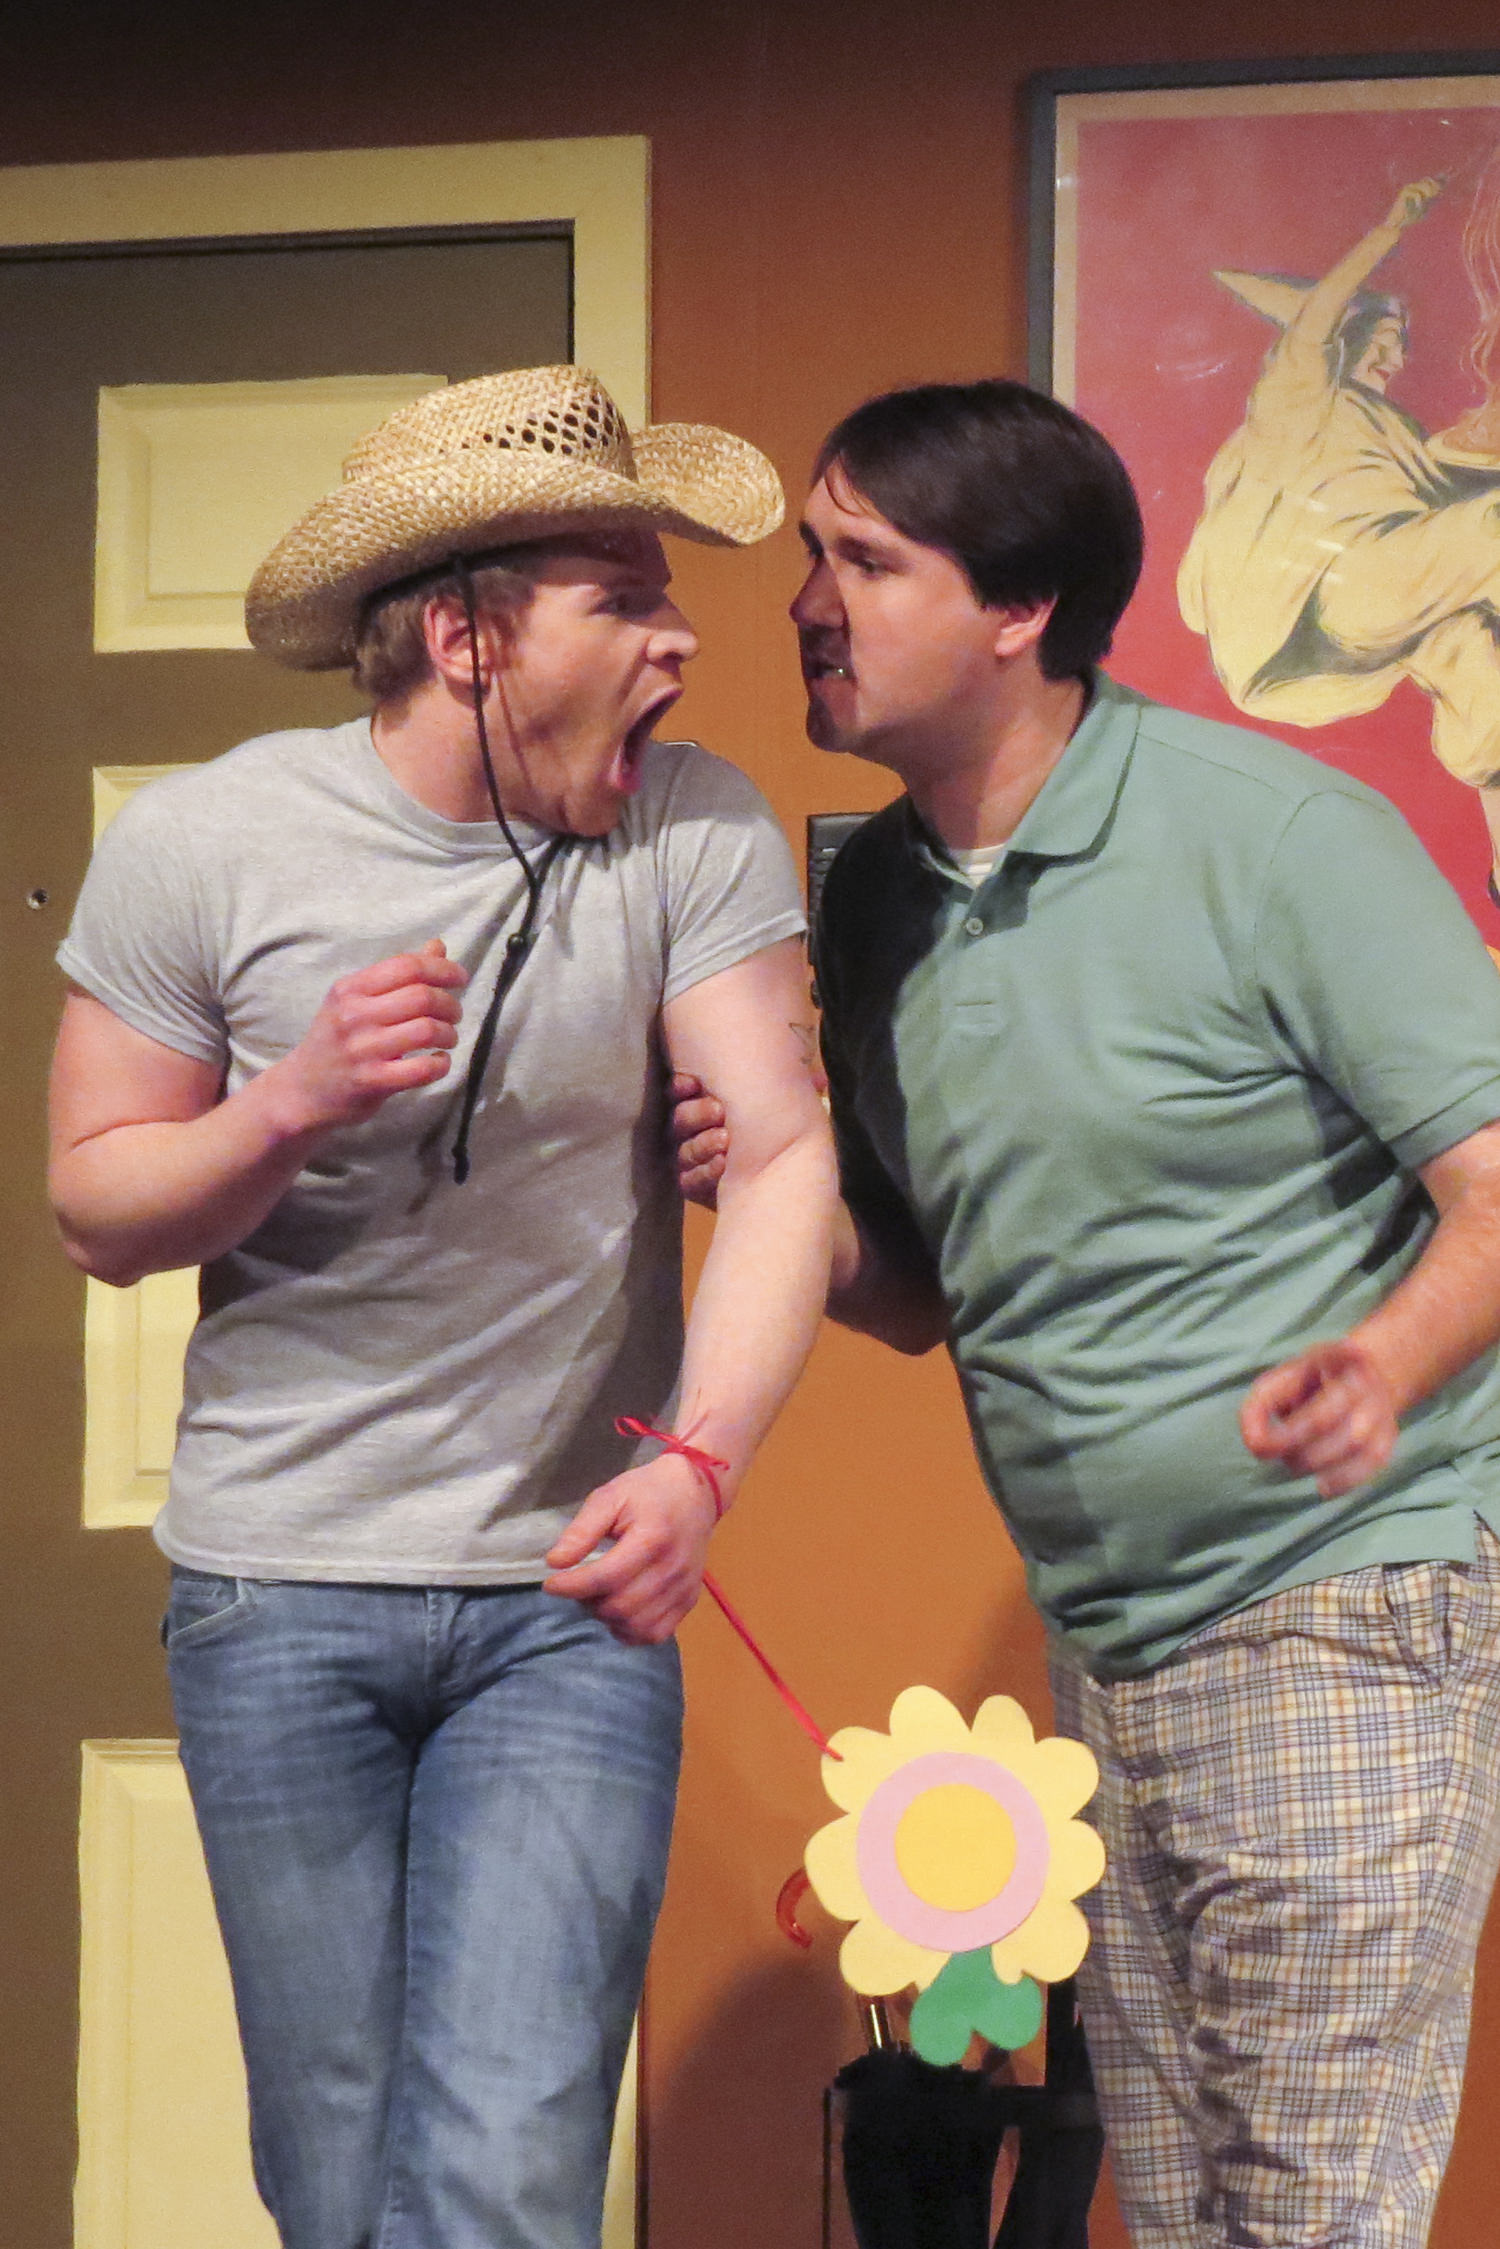 Cowboy (Tom Bryda) is reprimanded by Emory (Matthew Pechous) for arriving early to the party.
Photo by Arienne Davey